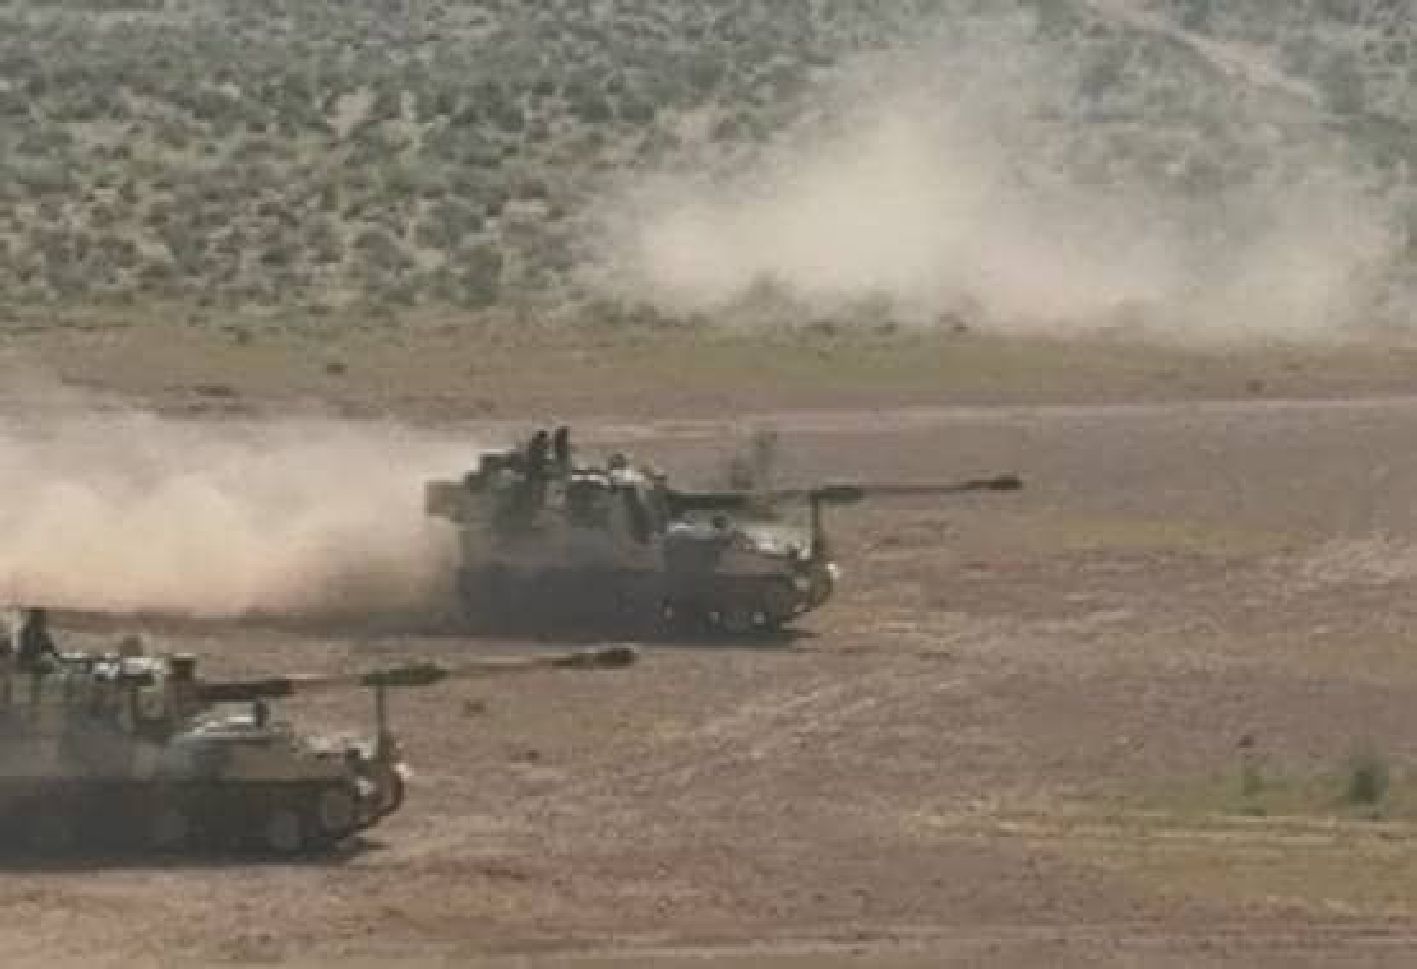 40 thousand soldiers doing maneuvers with 450 tanks in jaisalmer